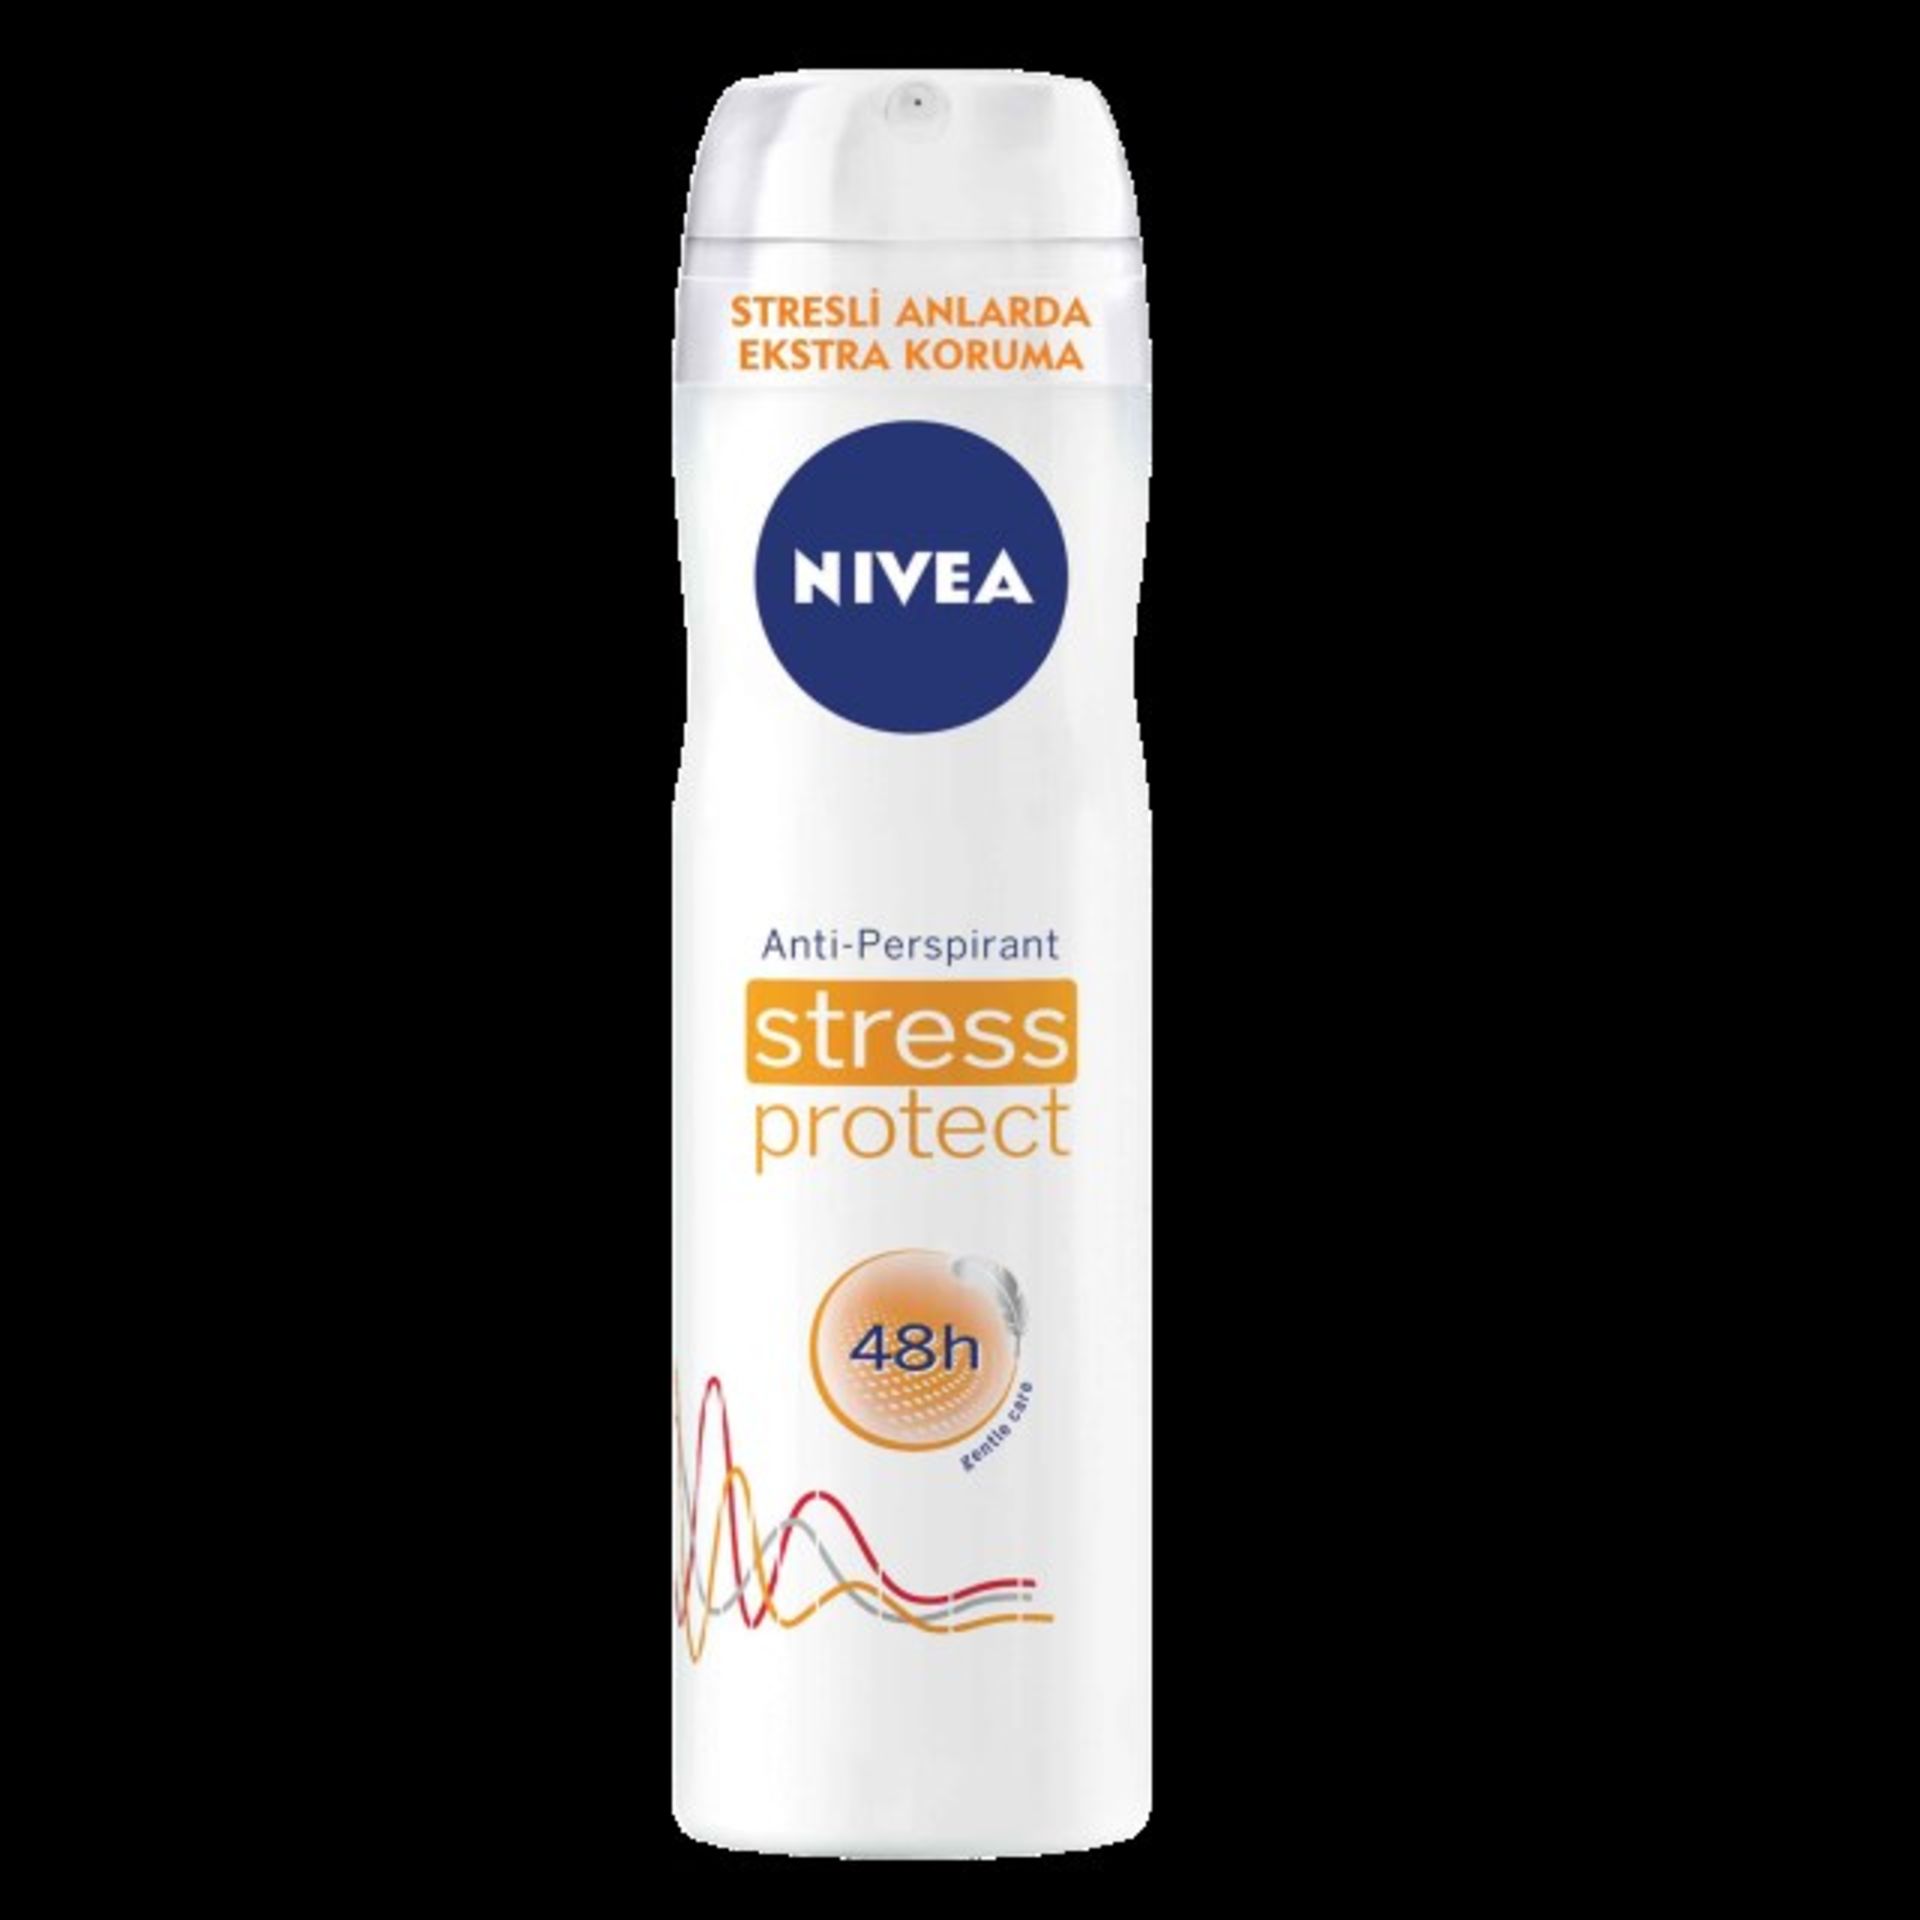 V Brand New Six Cans Of Nivea Stress Protect Anti Transpirant 48 Hour SRP2.99 Ea X 2 Bid price to be